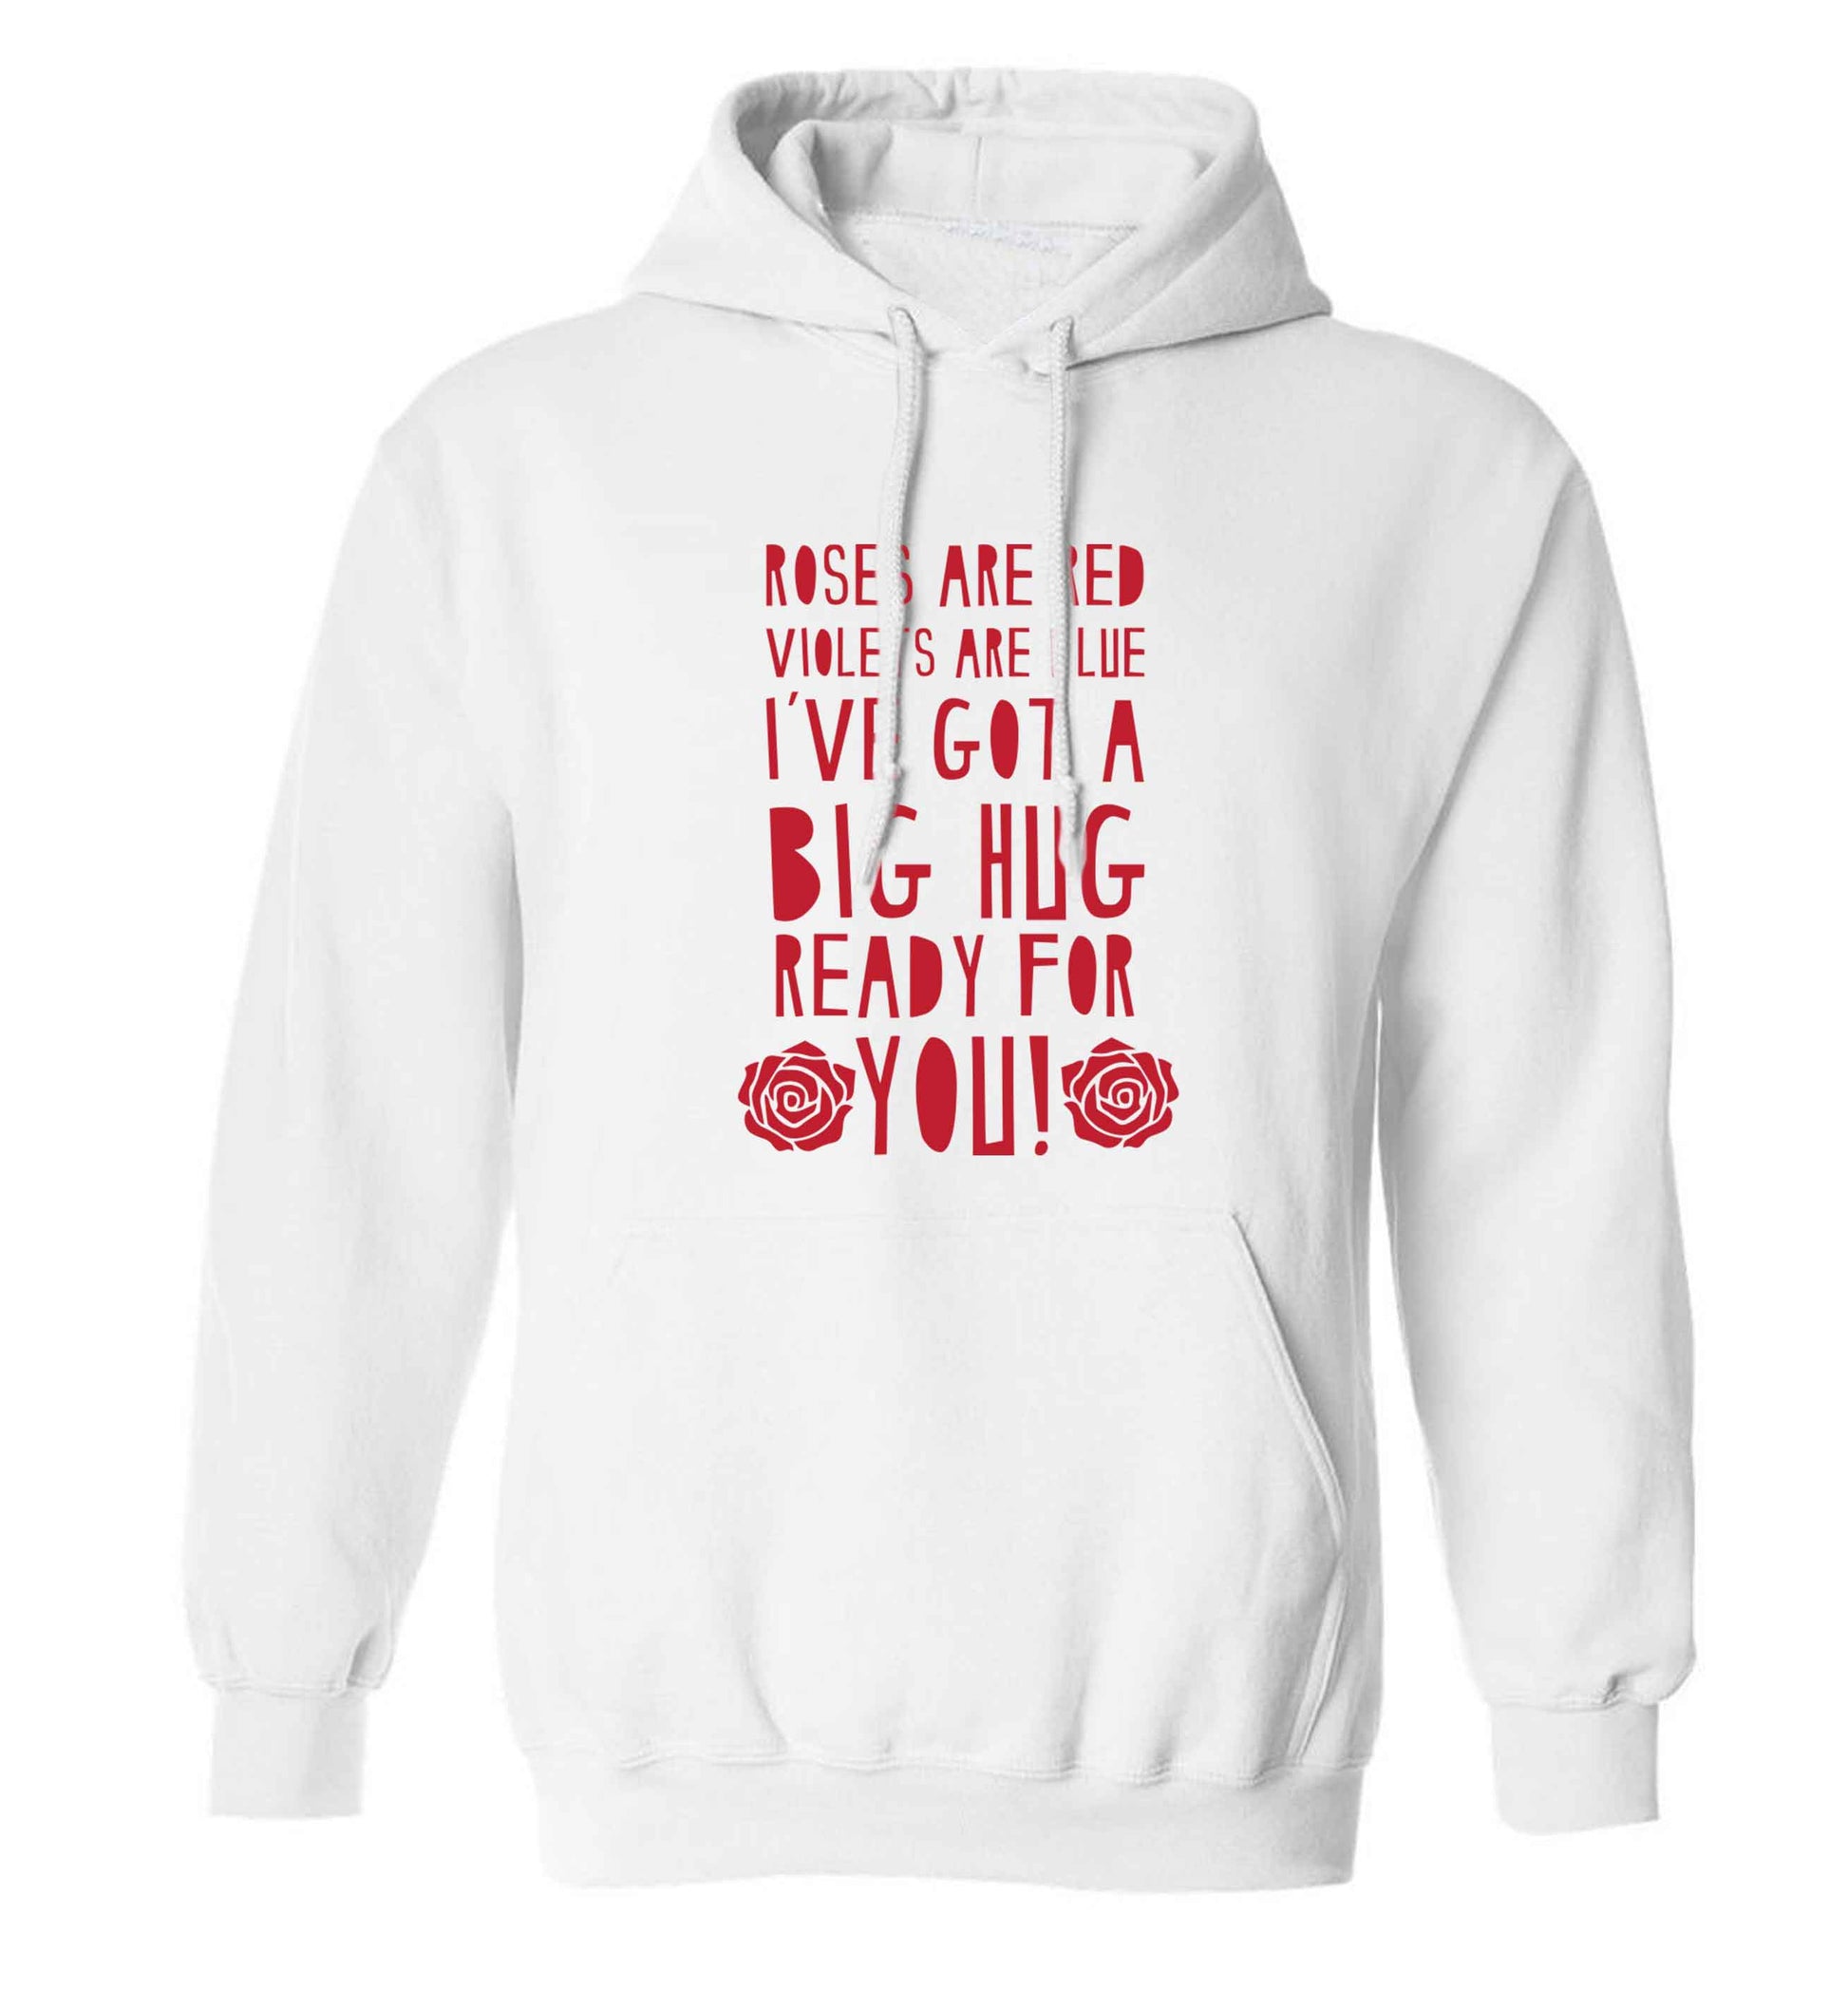 Roses are red violets are blue I've got a big hug coming for you adults unisex white hoodie 2XL